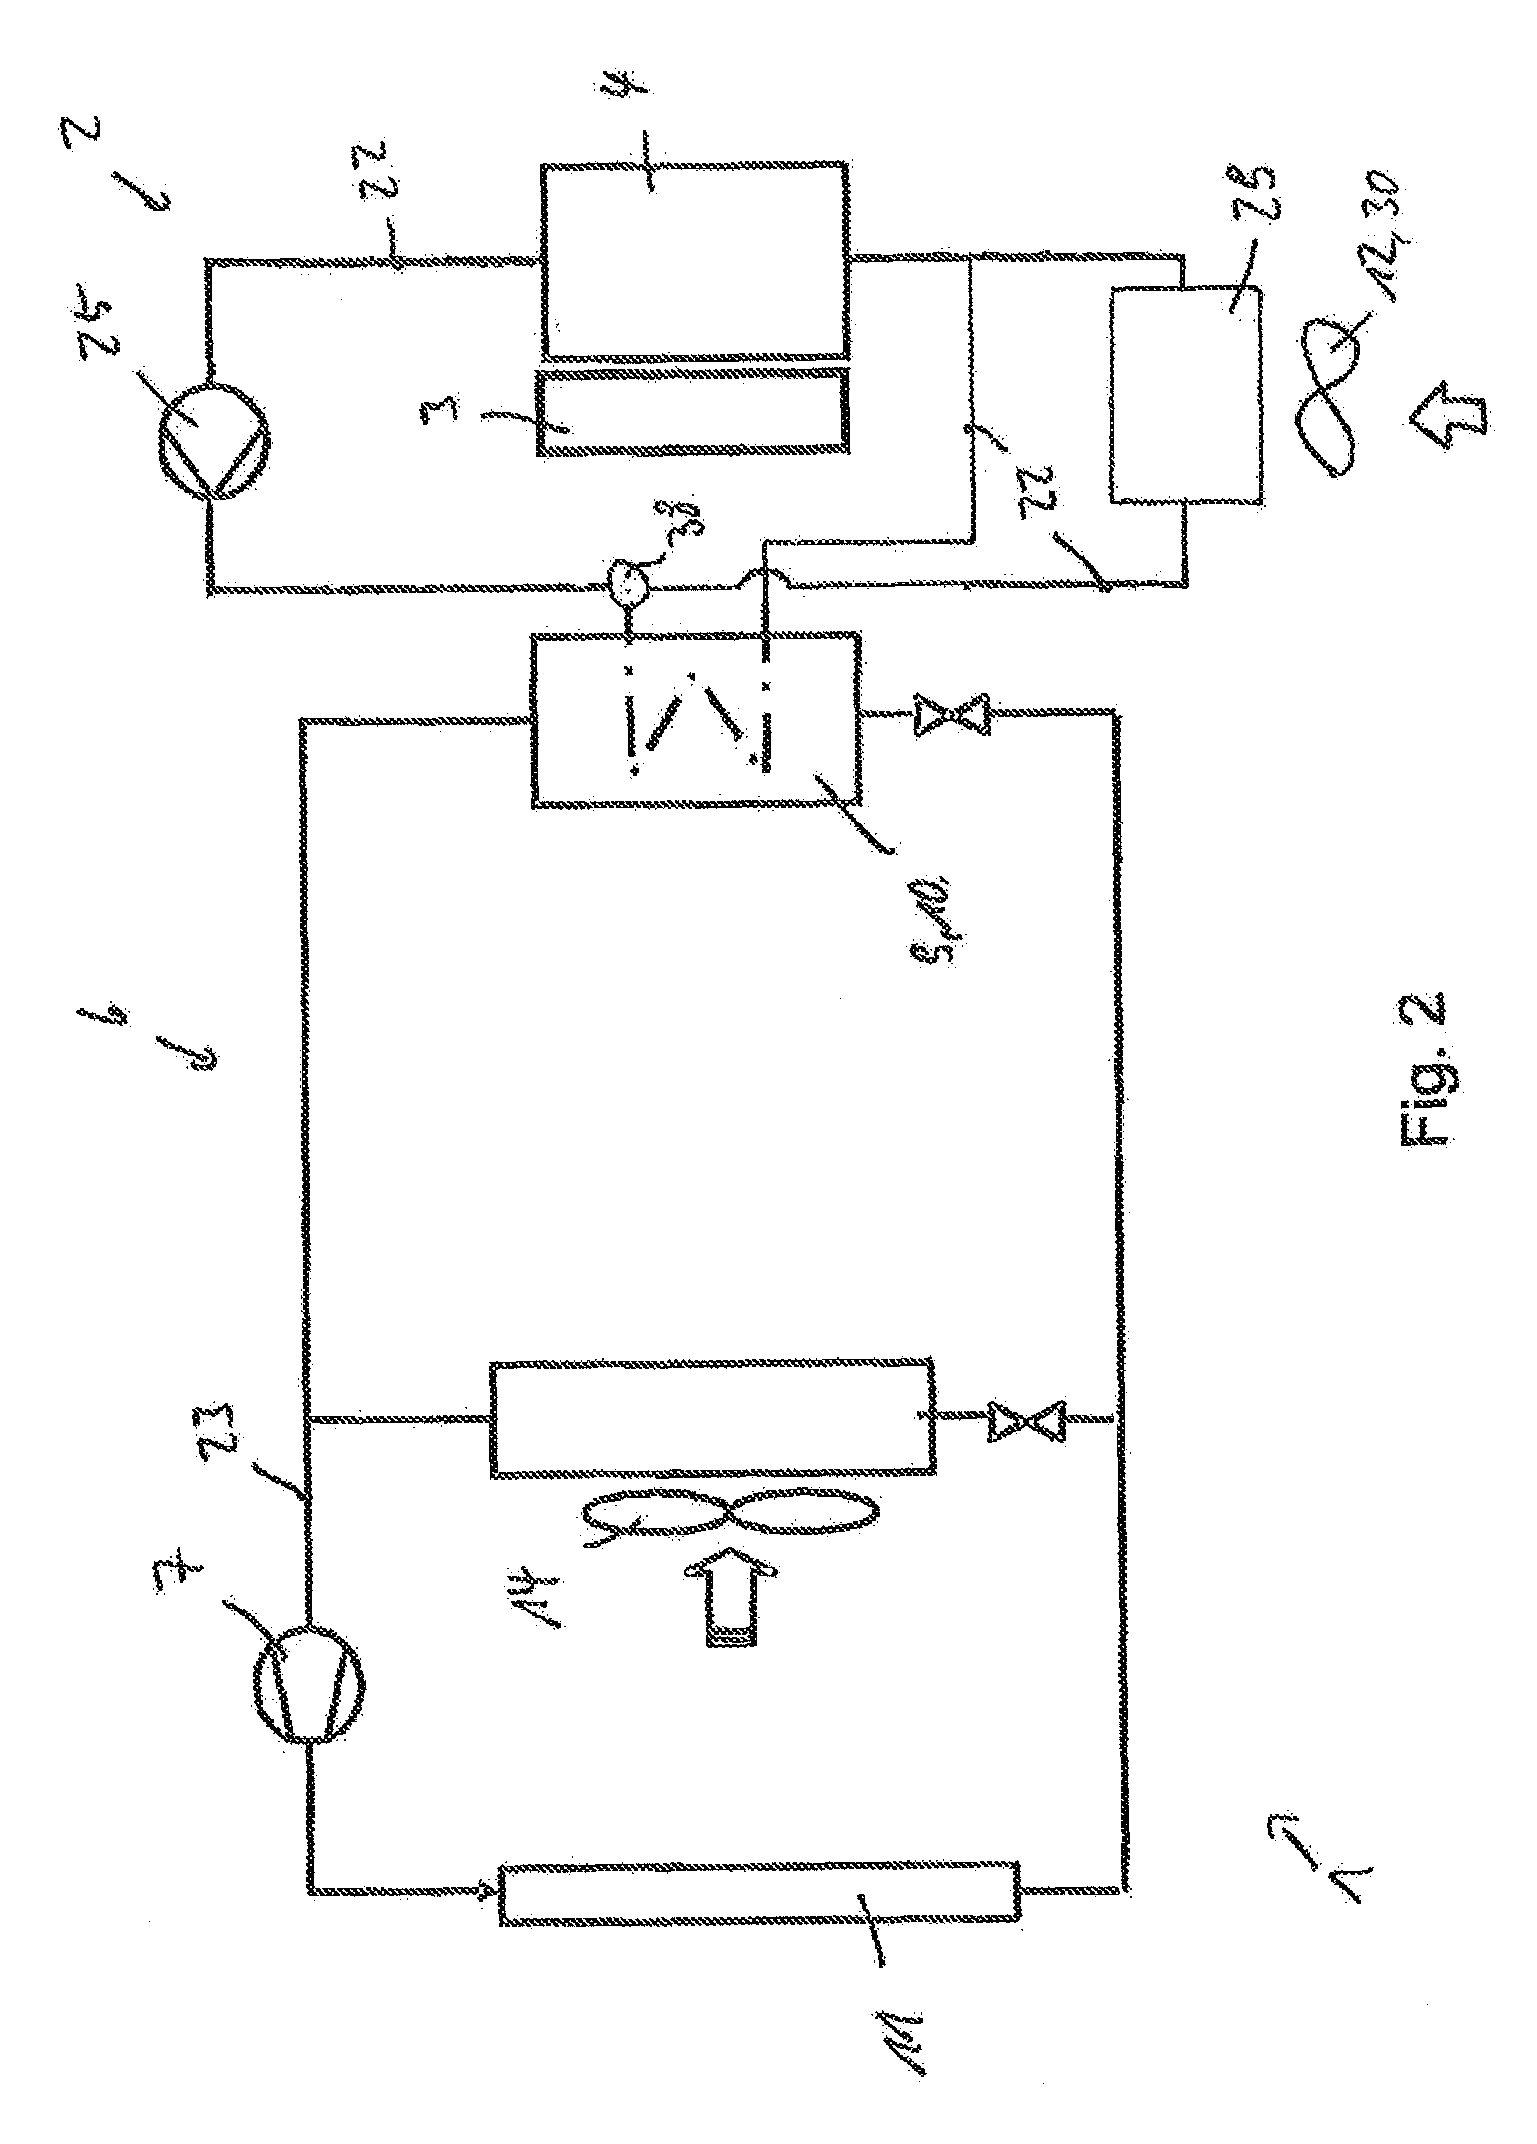 System for a motor vehicle for heating and/or cooling a battery and a vehicle interior